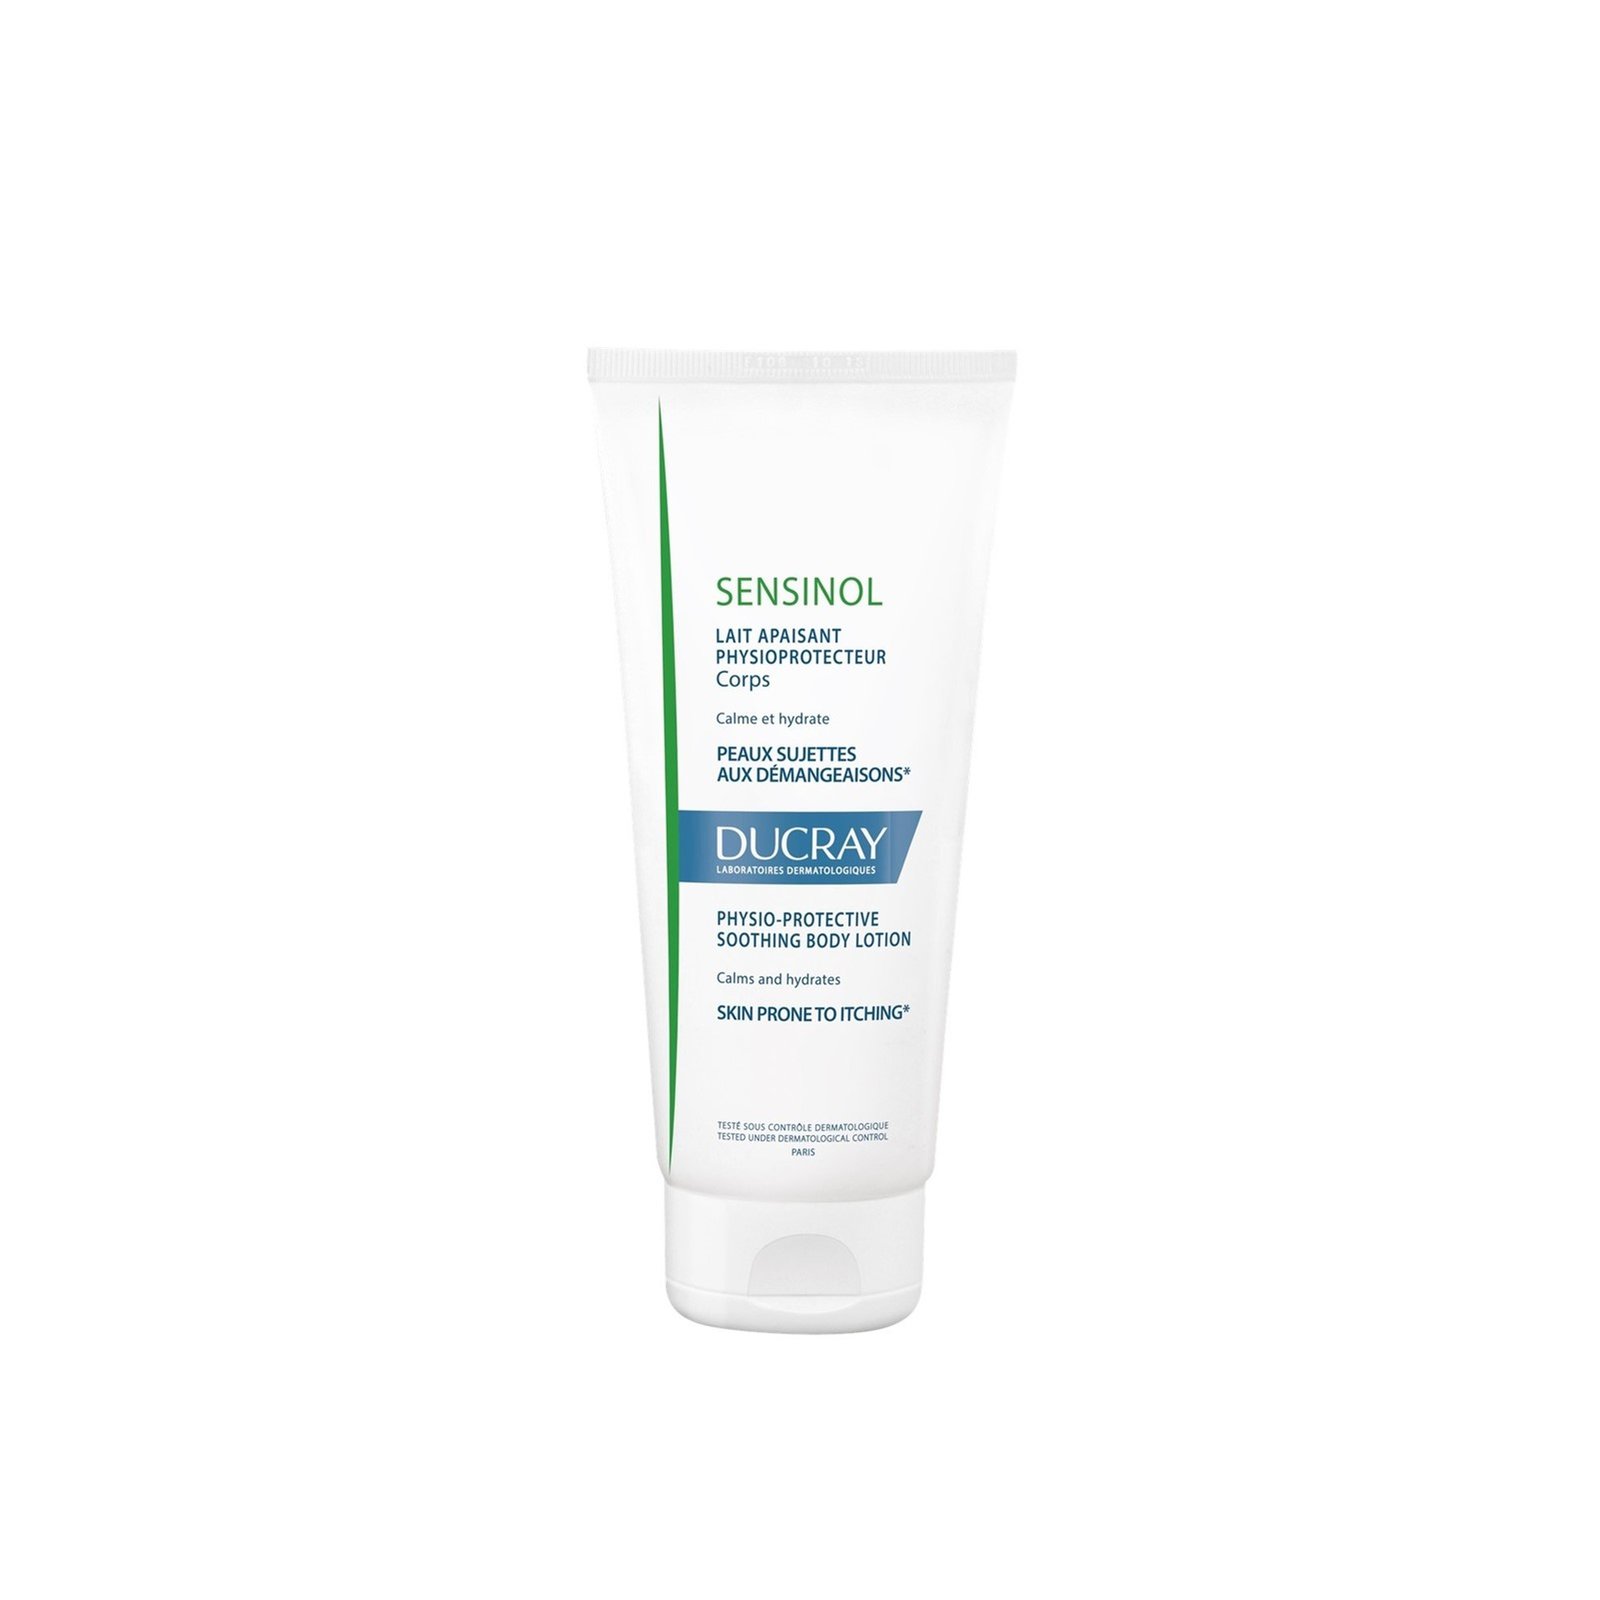 Ducray Sensinol Physio-Protective Soothing Body Lotion